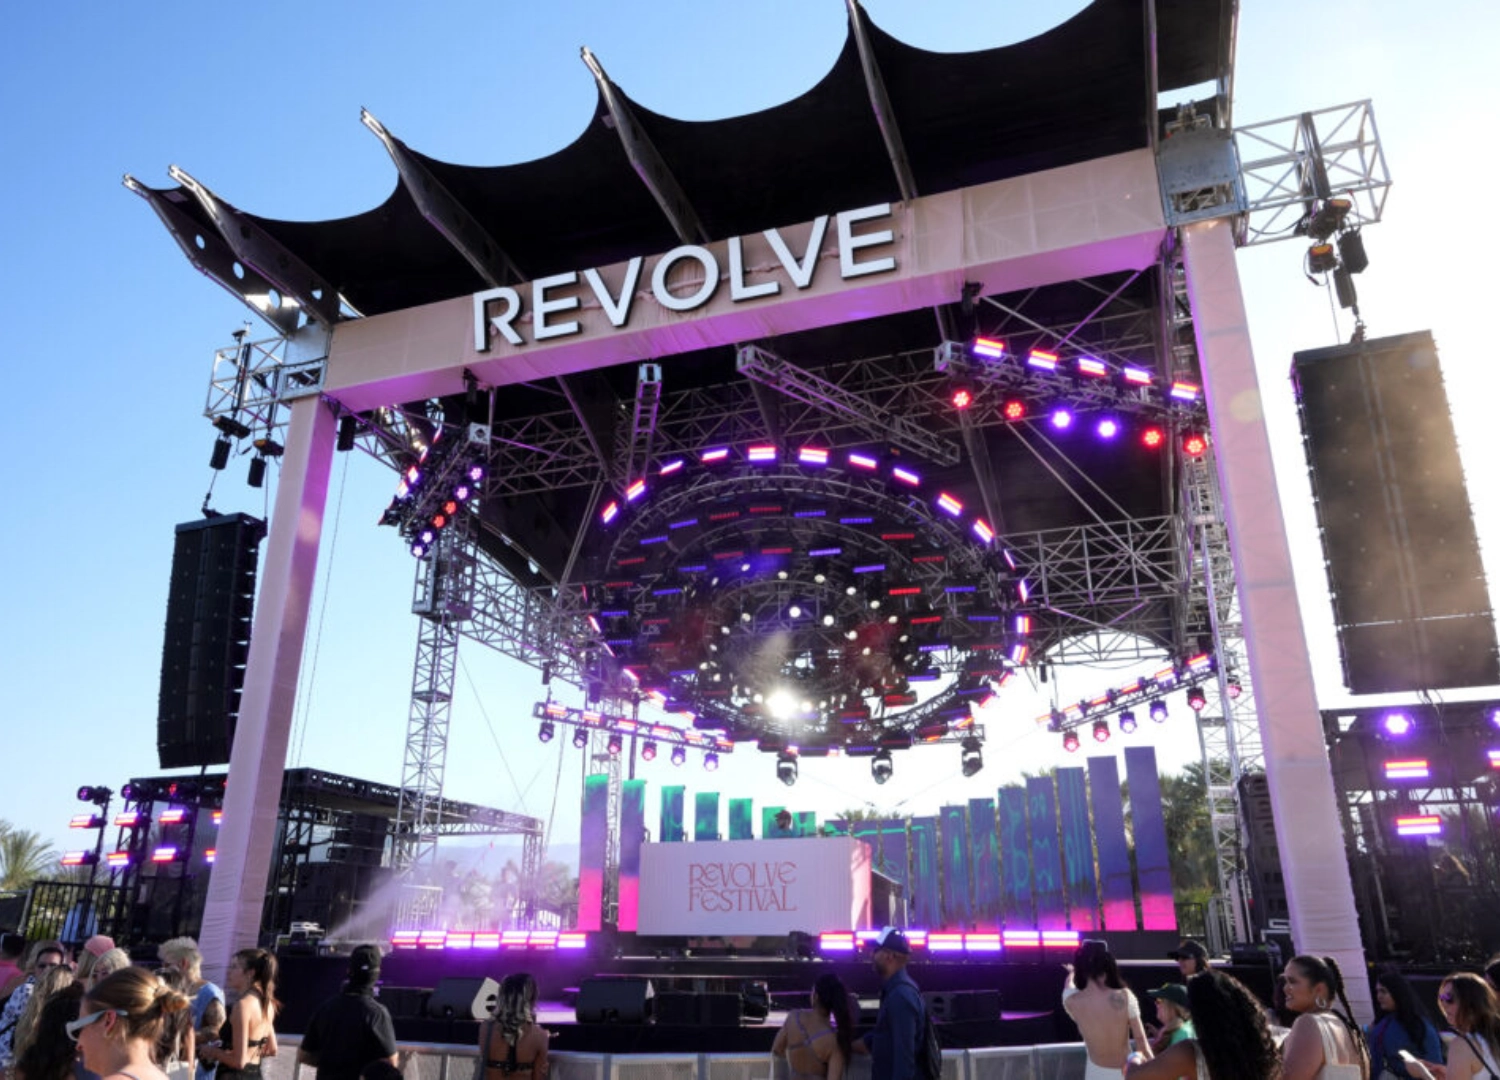 Image of stage with vibrant LED display and performer